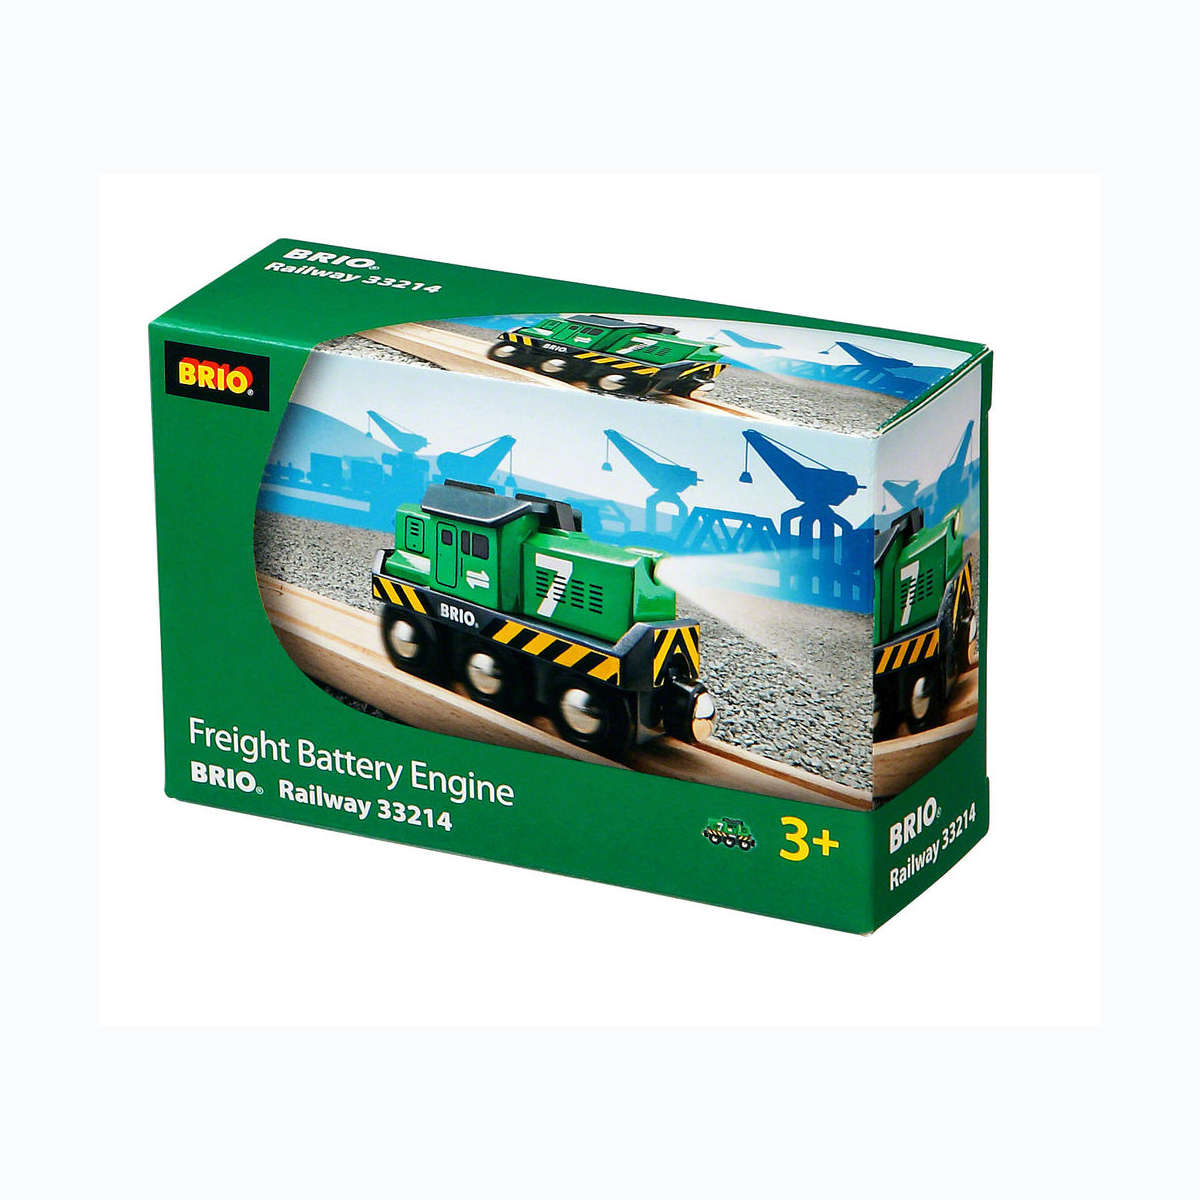 Freight Battery Engine by Brio